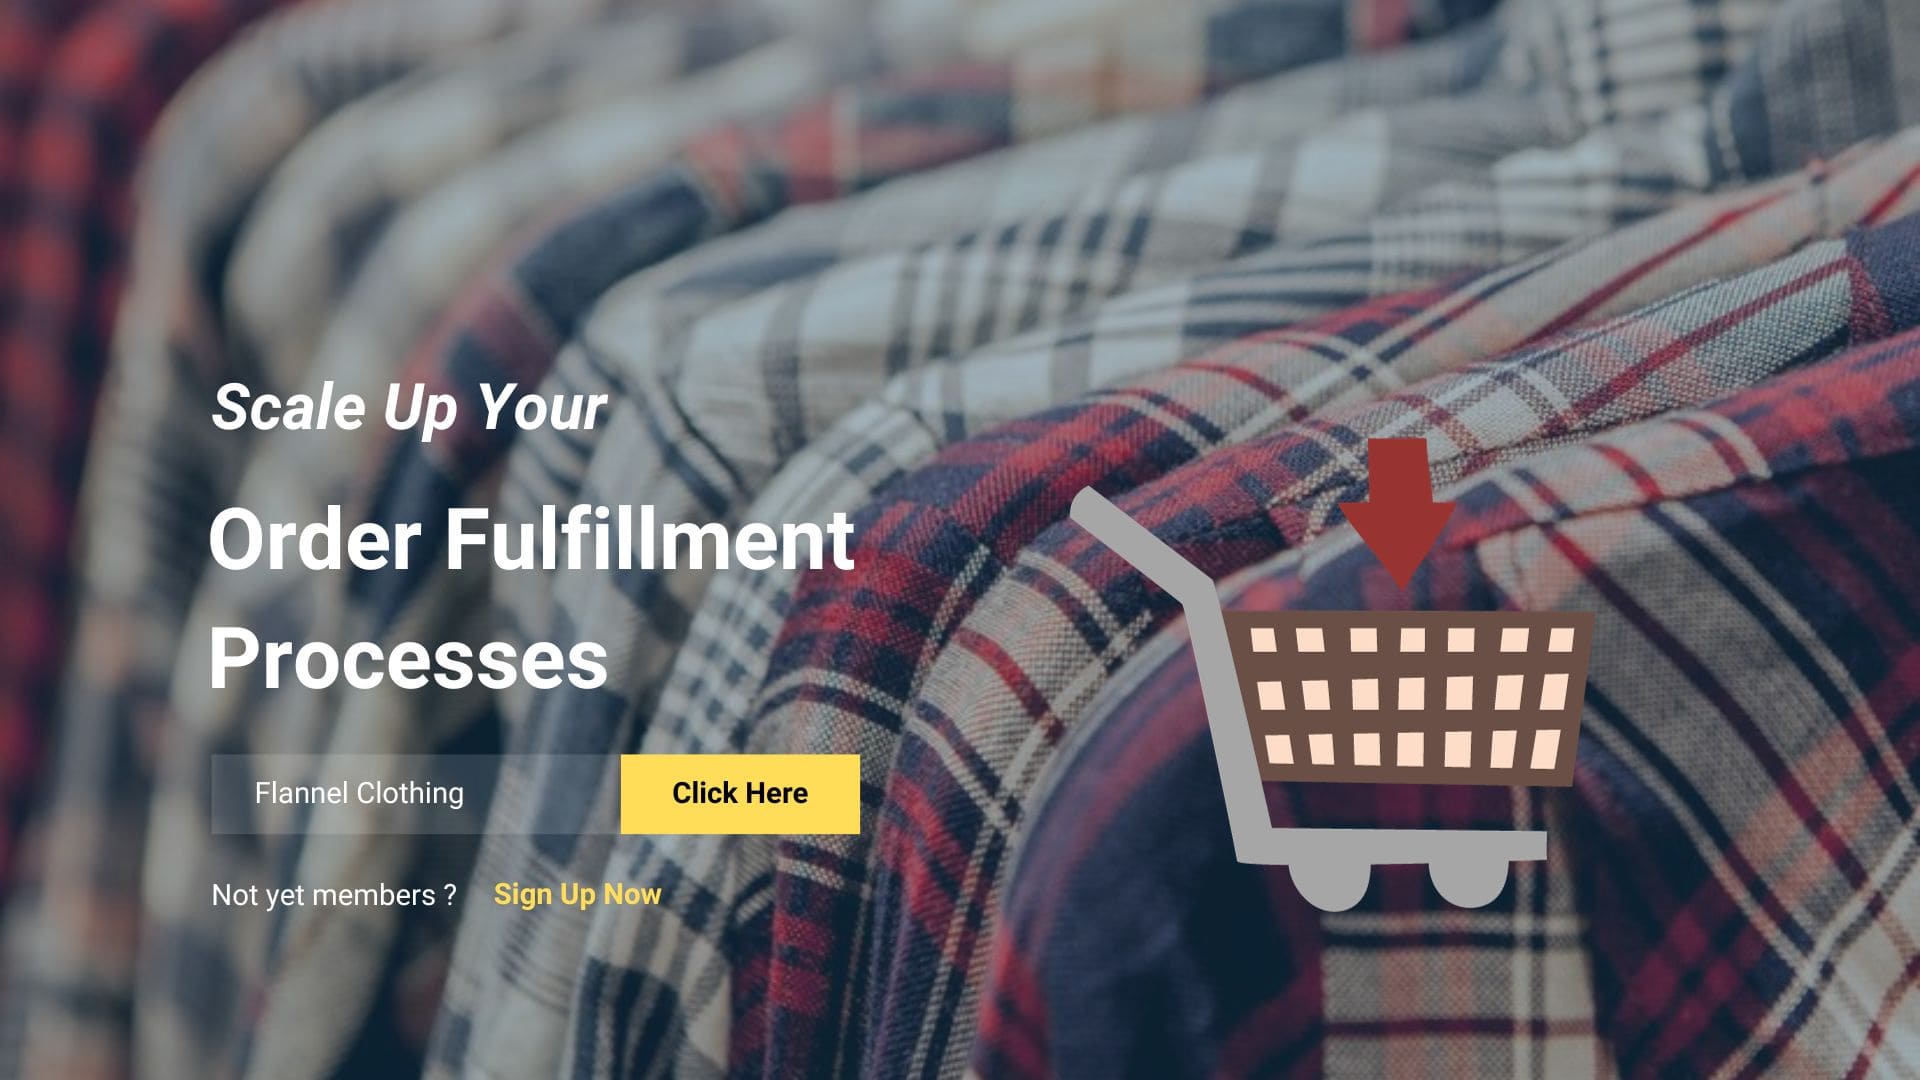 Scale Up Your Order Fulfillment Processes